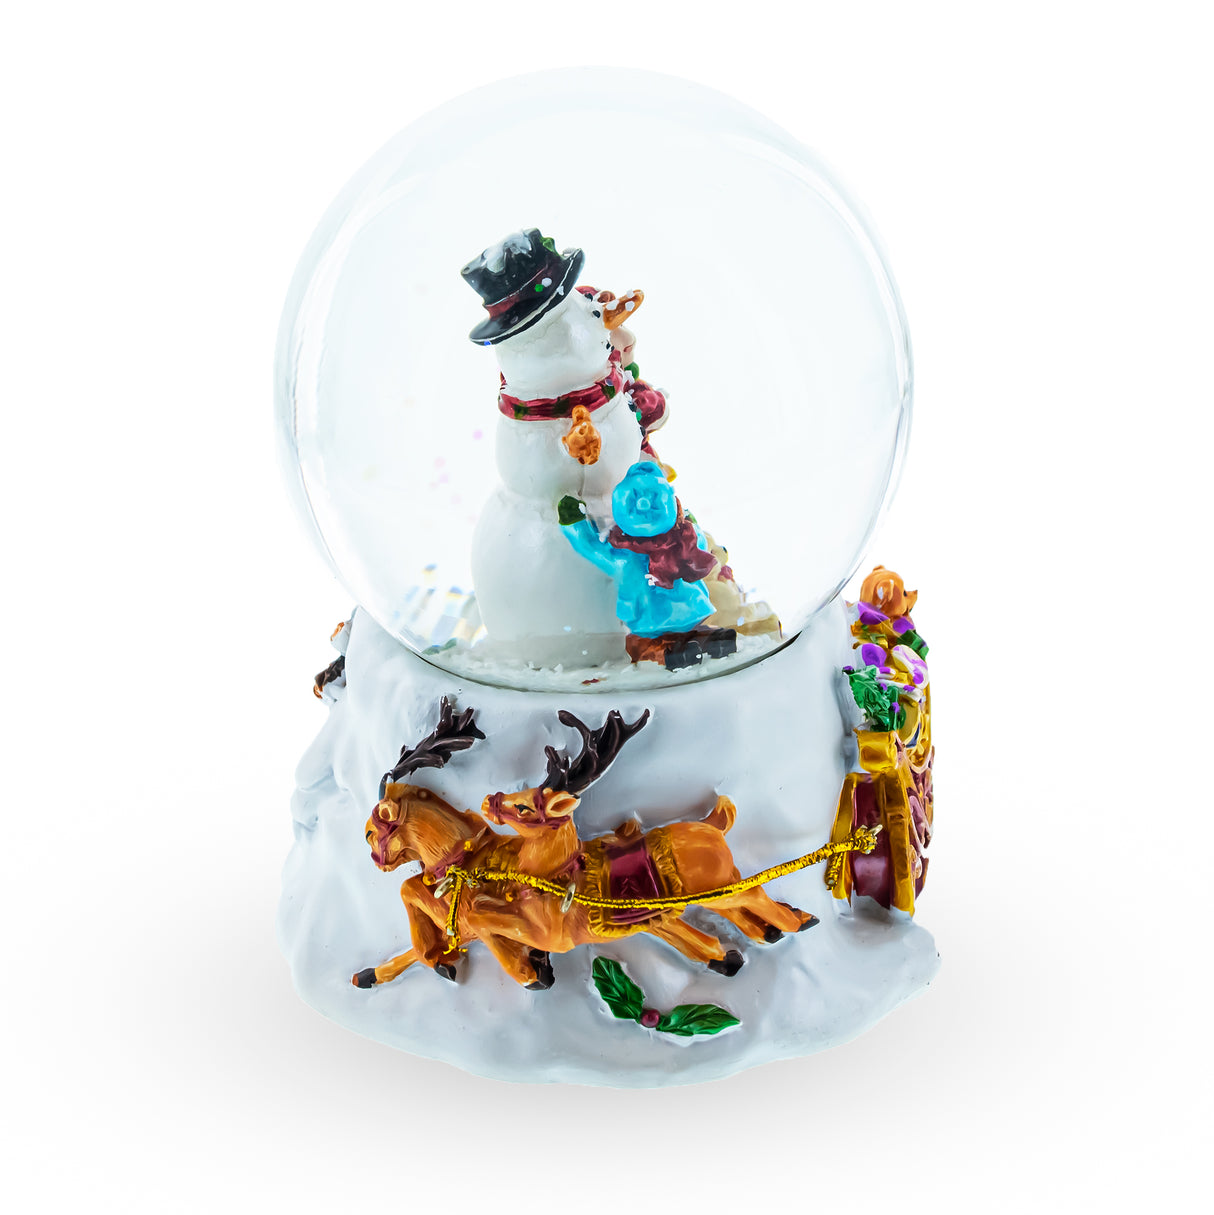 Warm Snowman Embrace: Musical Water Snow Globe with Kids Hugging ,dimensions in inches: 4.8 x 3.5 x 3.5